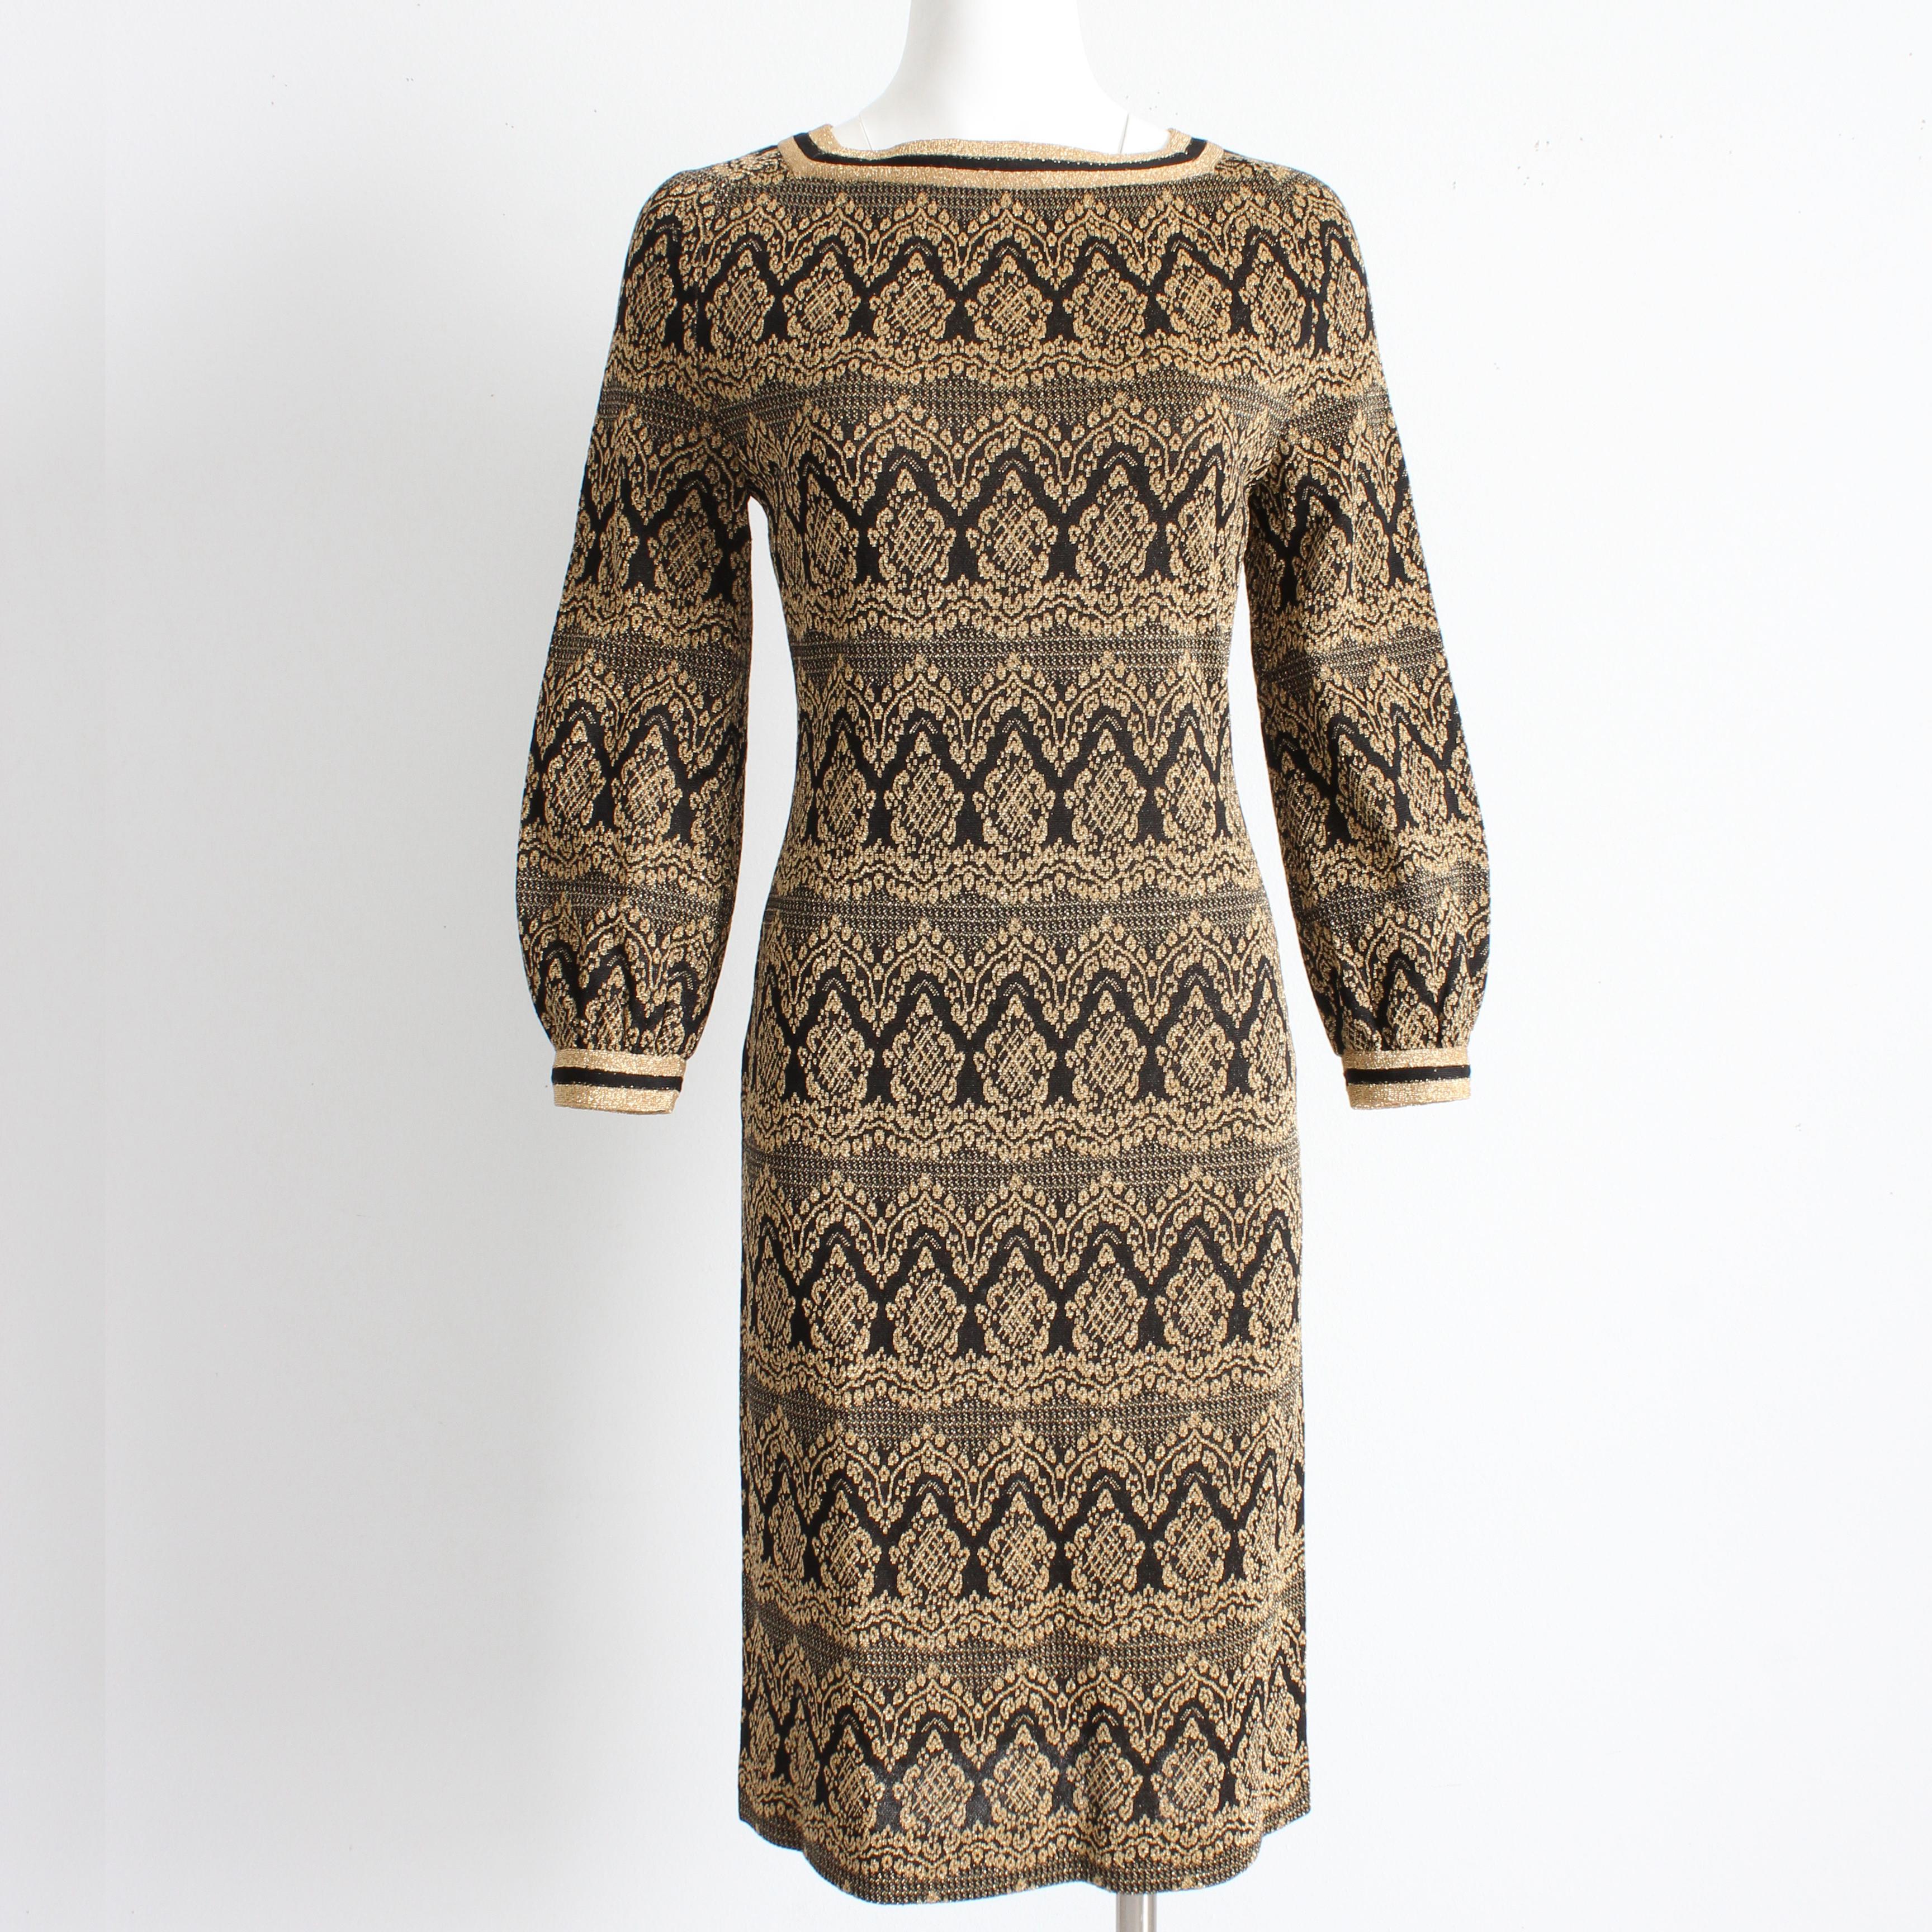 Vintage knit dress by Bobette Imports France, likely made in the late 60s. Made from black and gold metallic Lurex knit, it features a mod Moroccan-inspired pattern throughout, with rear zip and hook/eye fastener and peasant sleeves. Unlined/no